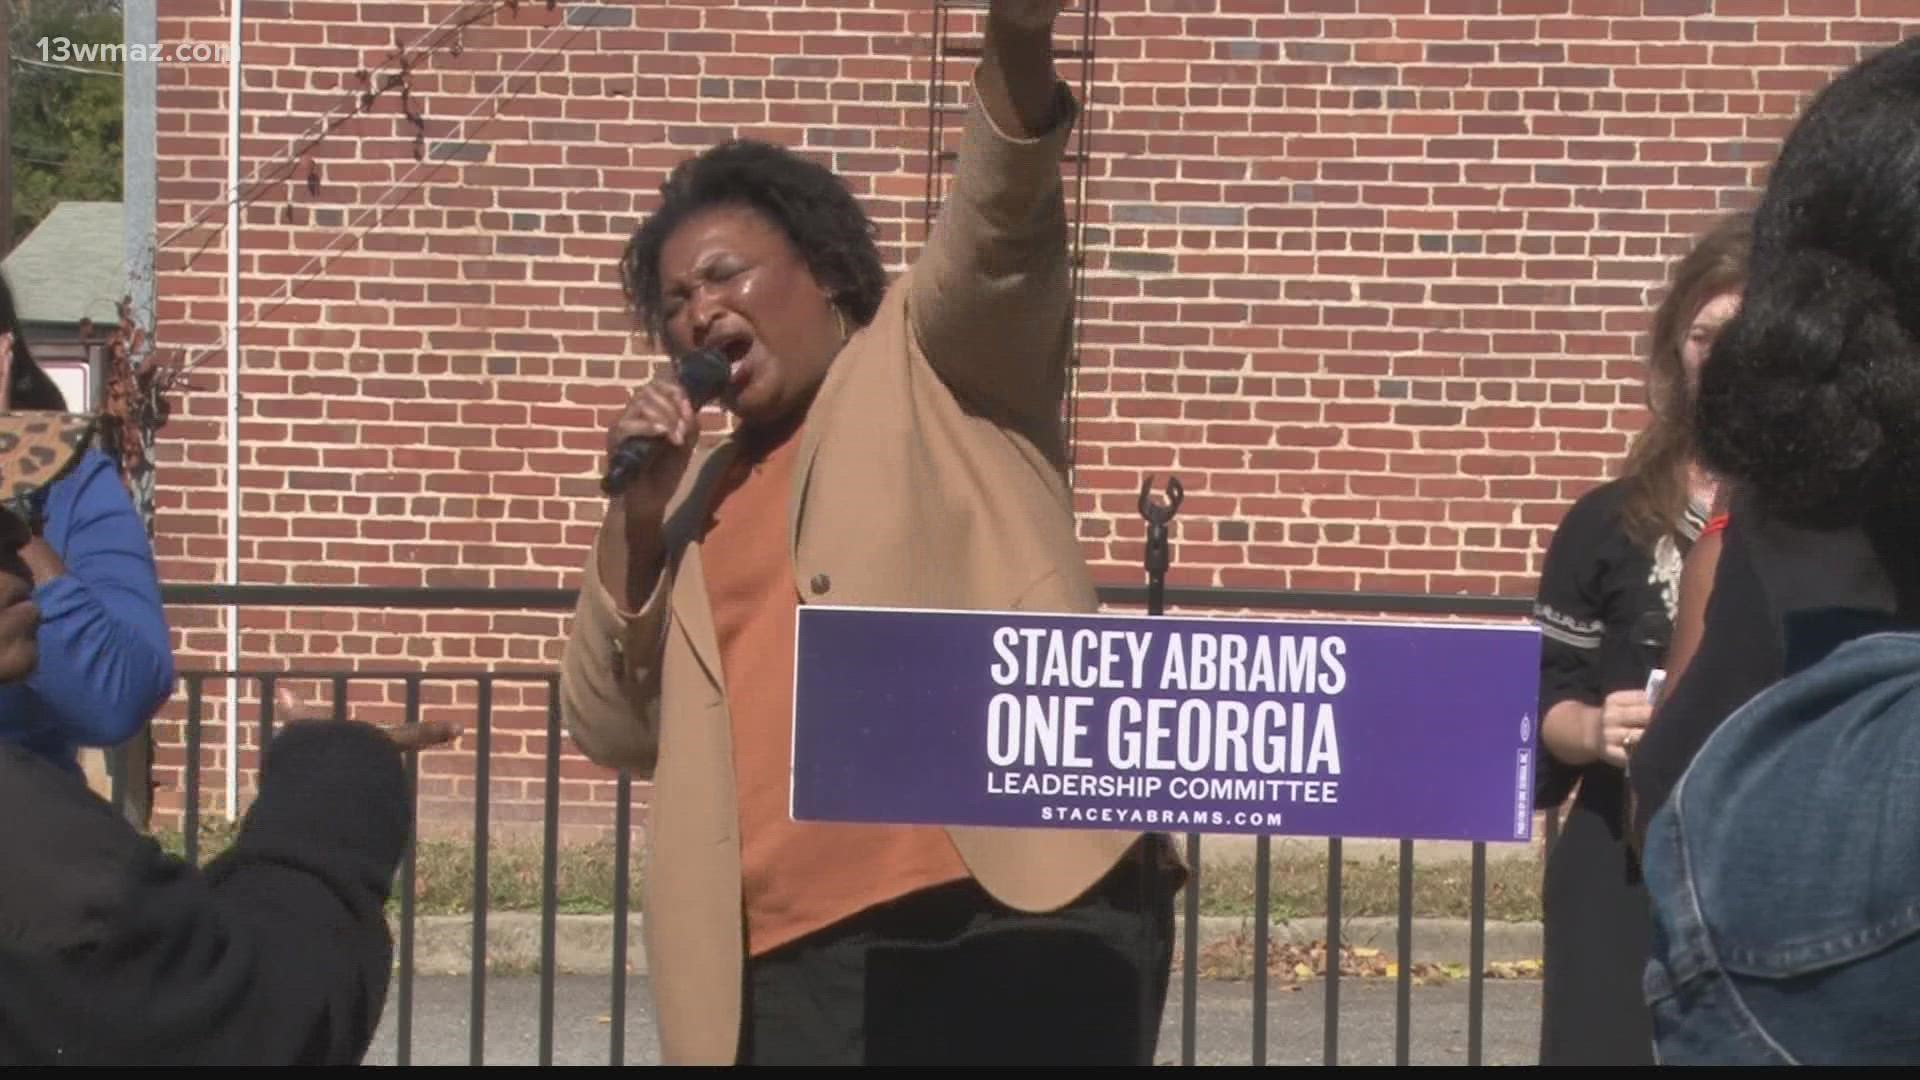 People showed up and showed out for Stacey Abrams today in Milledgeville. She talked about topics like voter rights, women's bodily autonomy, and the open carry law